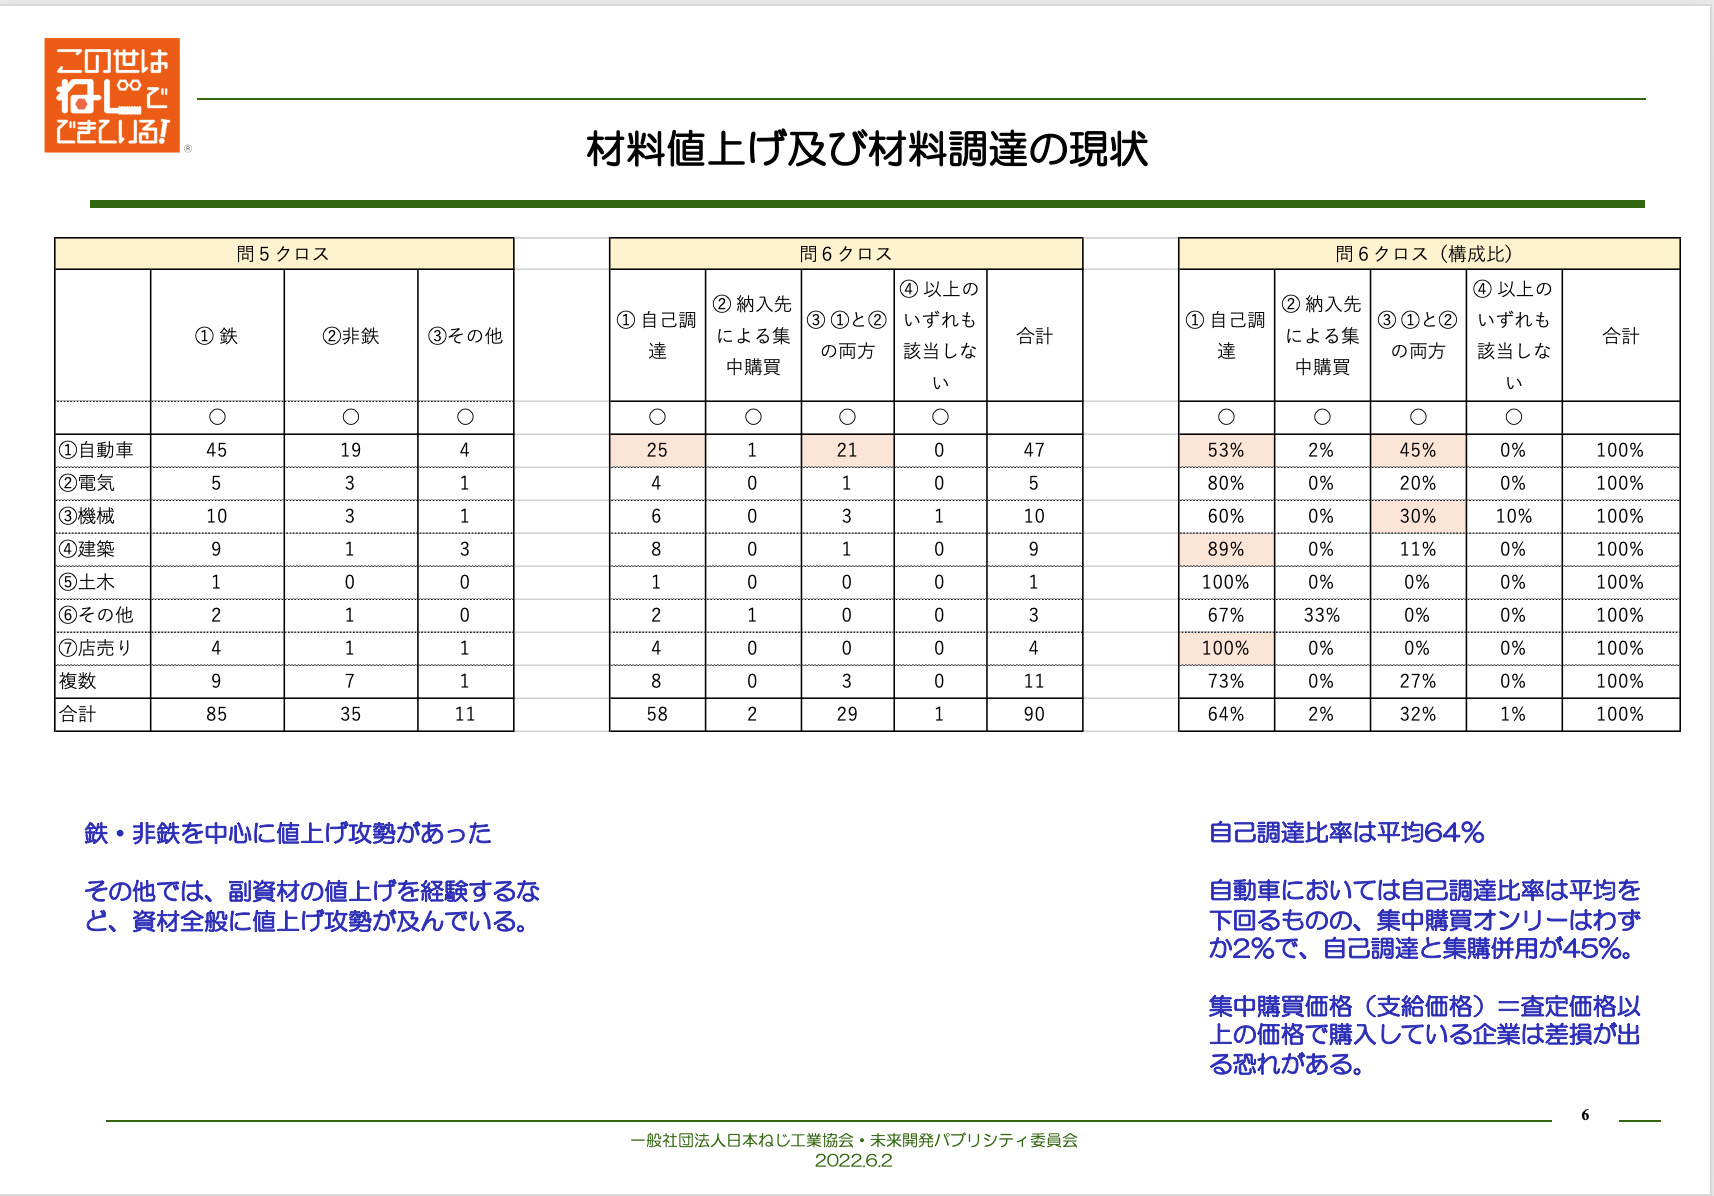 ６：Survey analysis results 2022-06-10 11.30.15.png